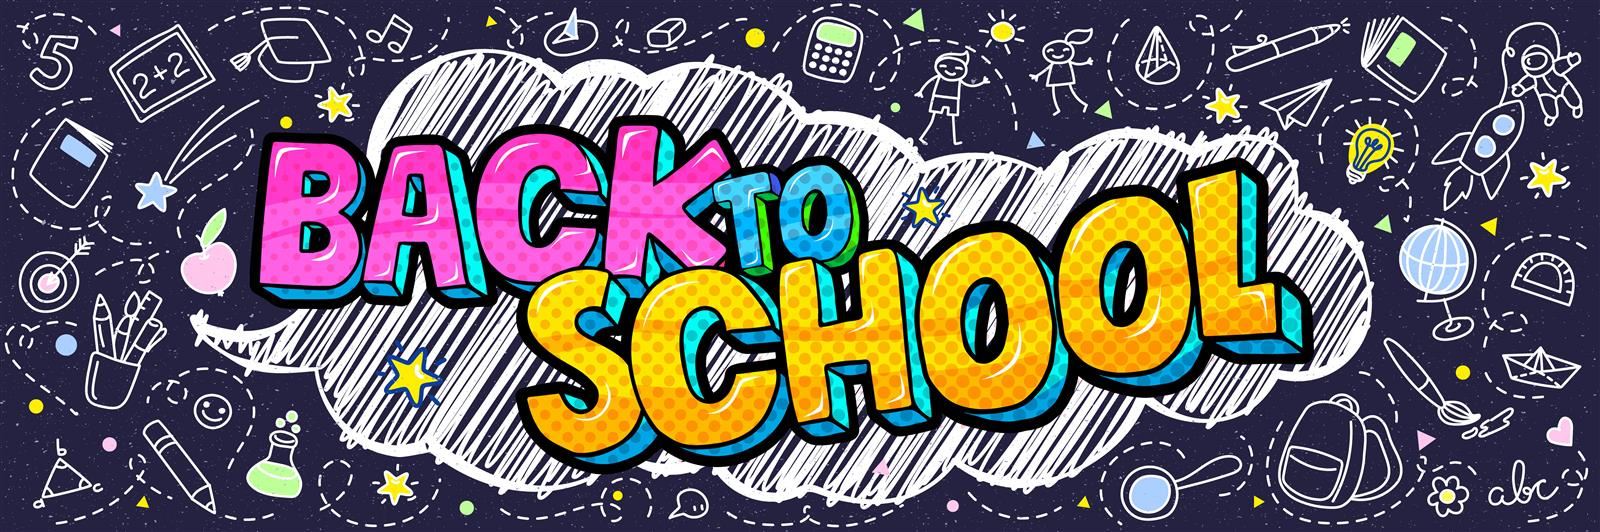 Back-to-School Banner